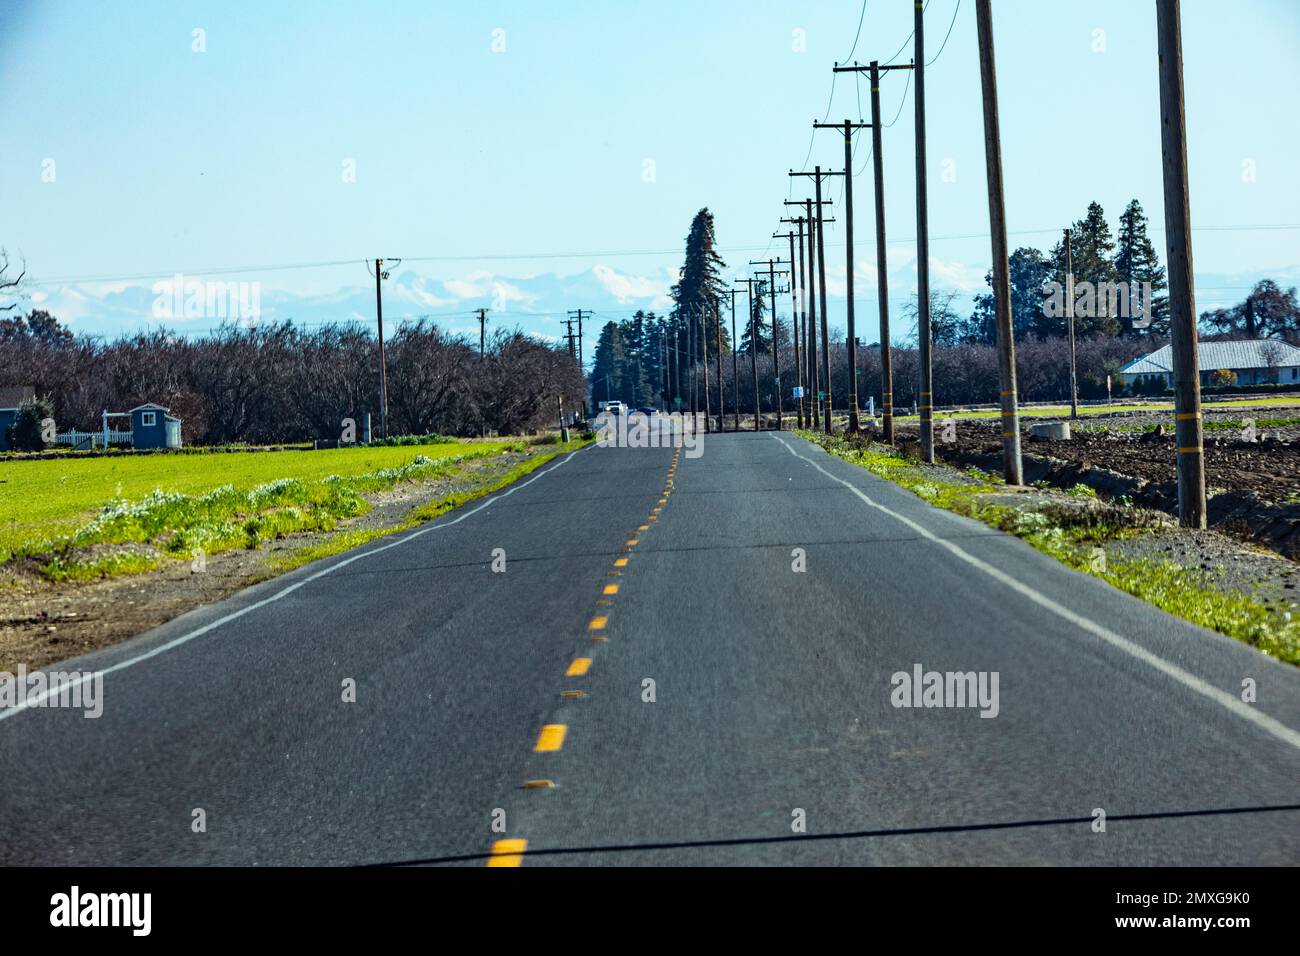 Telephoto lens compression is demonstrated in this photo of a road and telephone poles Stock Photo